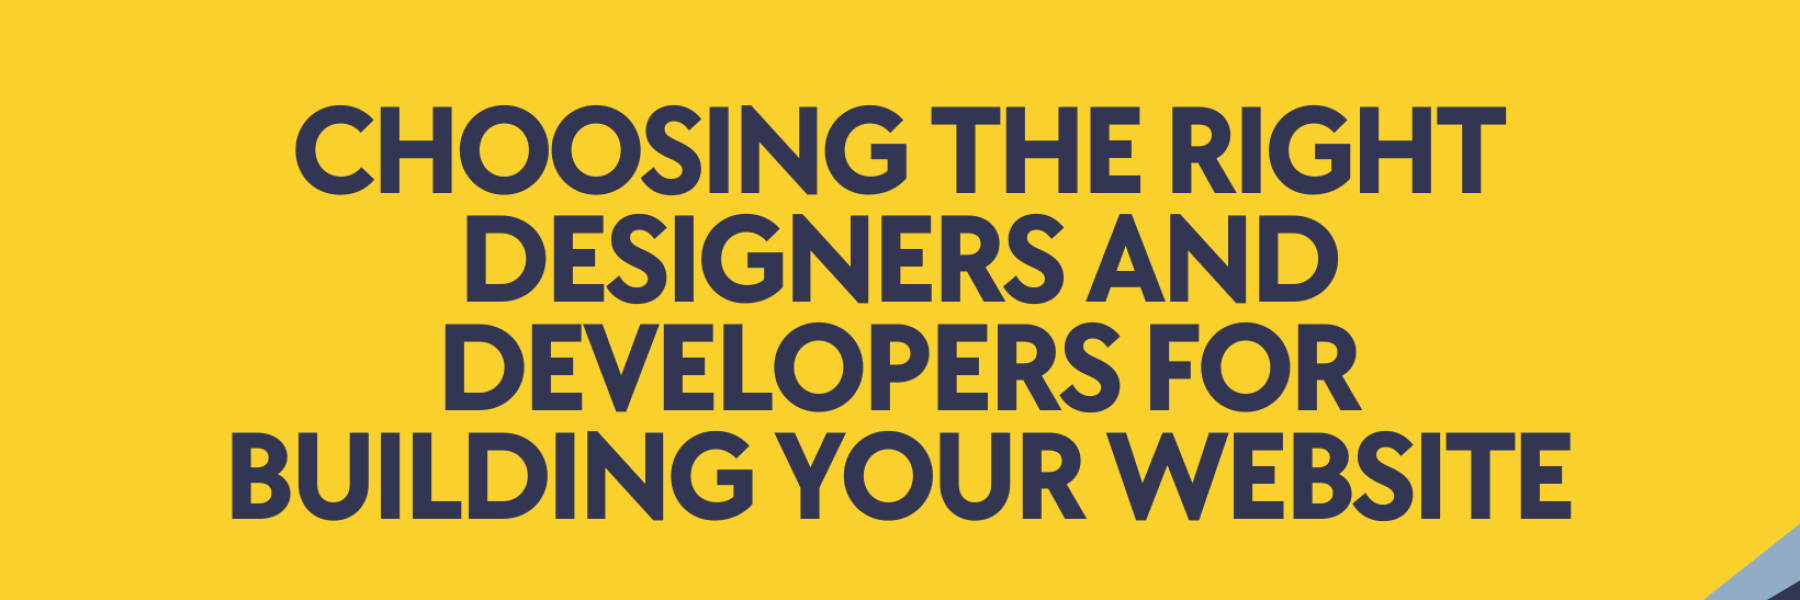 Choosing the Right Designers and Developers for Building Your Website